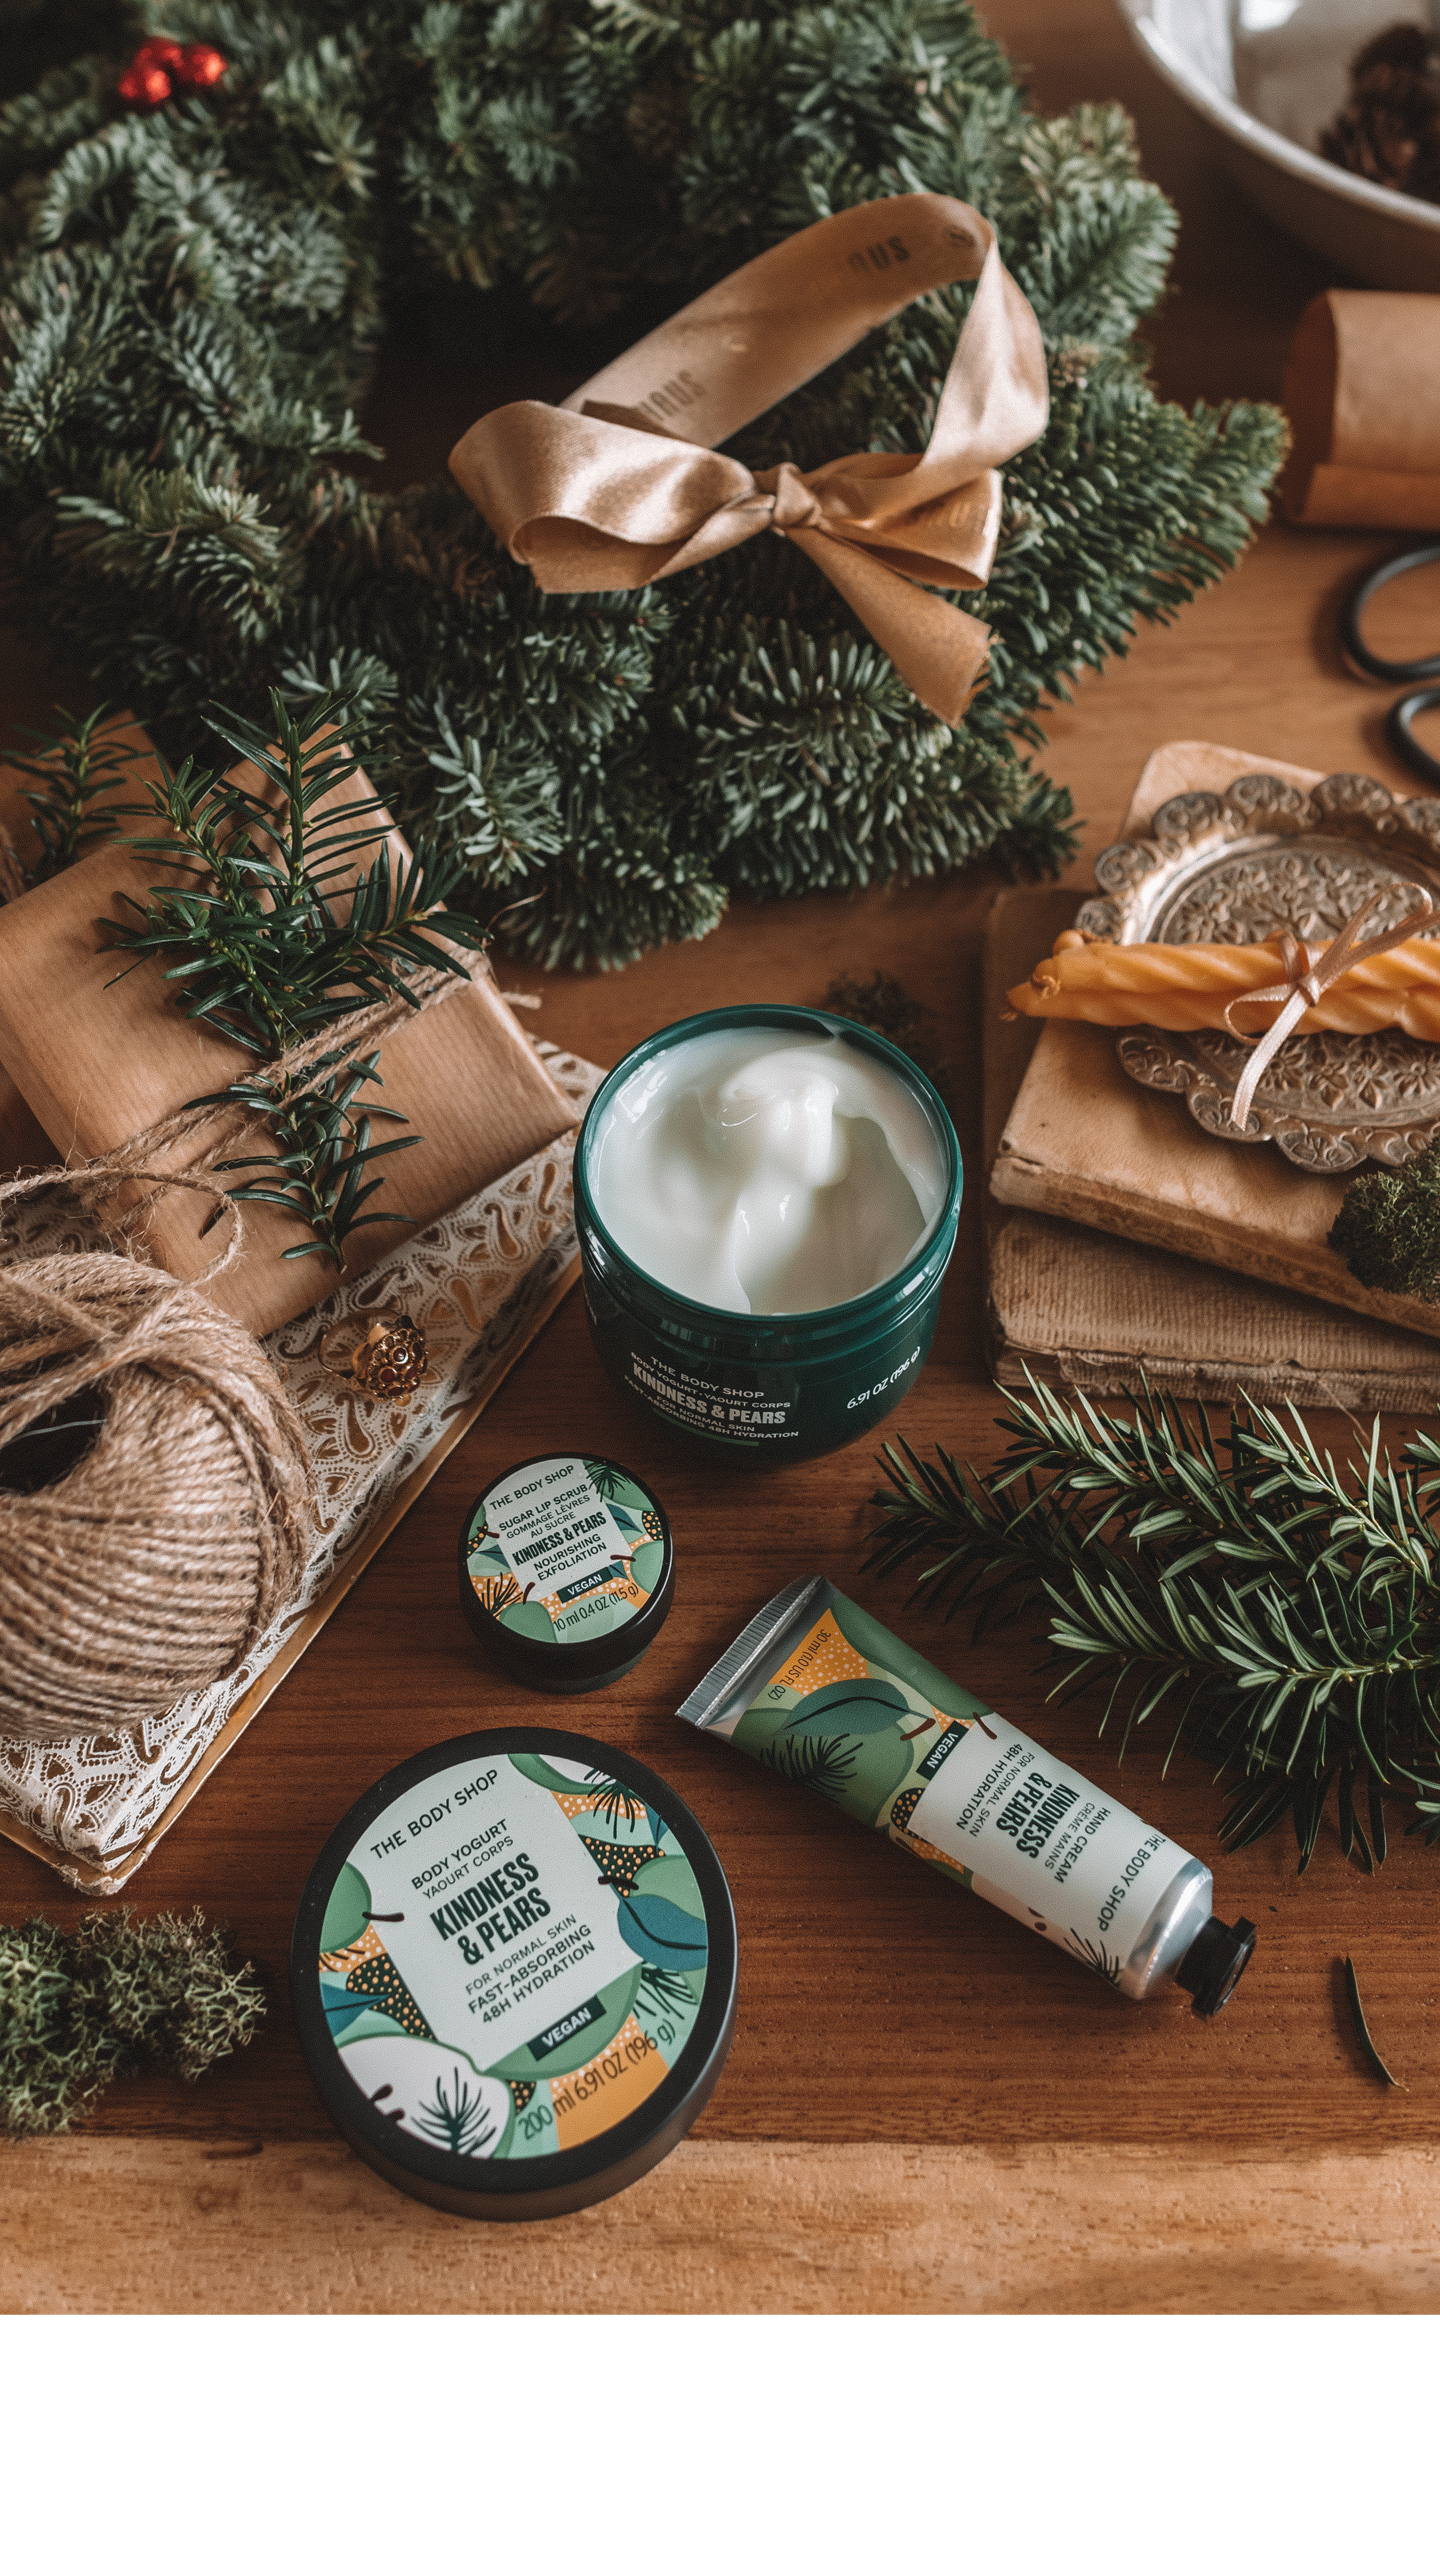 The Body Shop Christmas Gift Guide